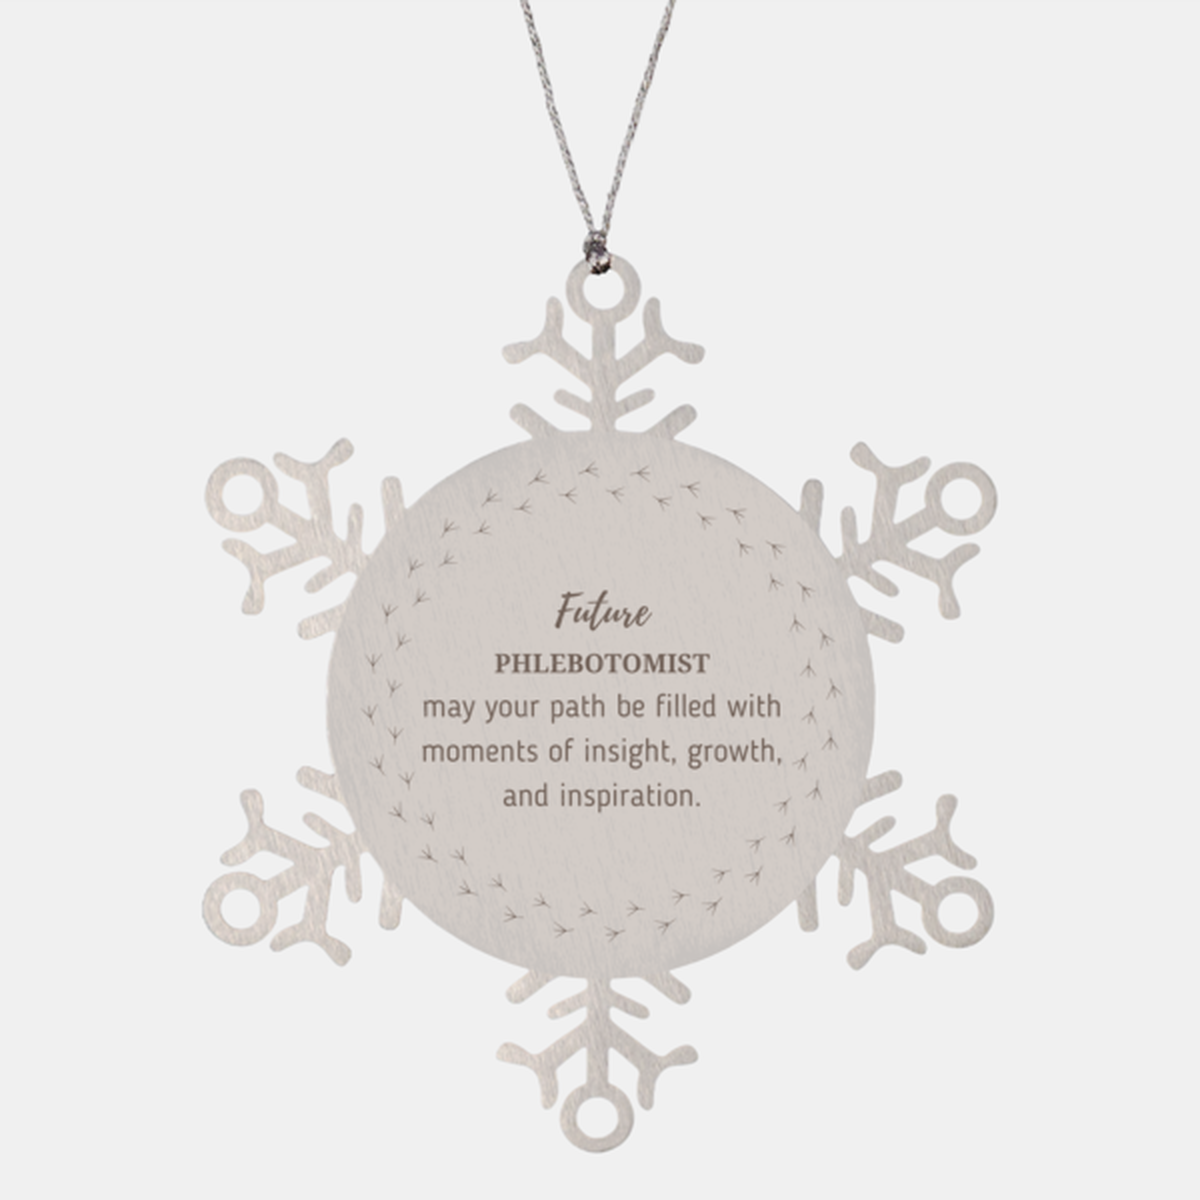 Future Phlebotomist Gifts, May your path be filled with moments of insight, Graduation Gifts for New Phlebotomist, Christmas Unique Snowflake Ornament For Men, Women, Friends